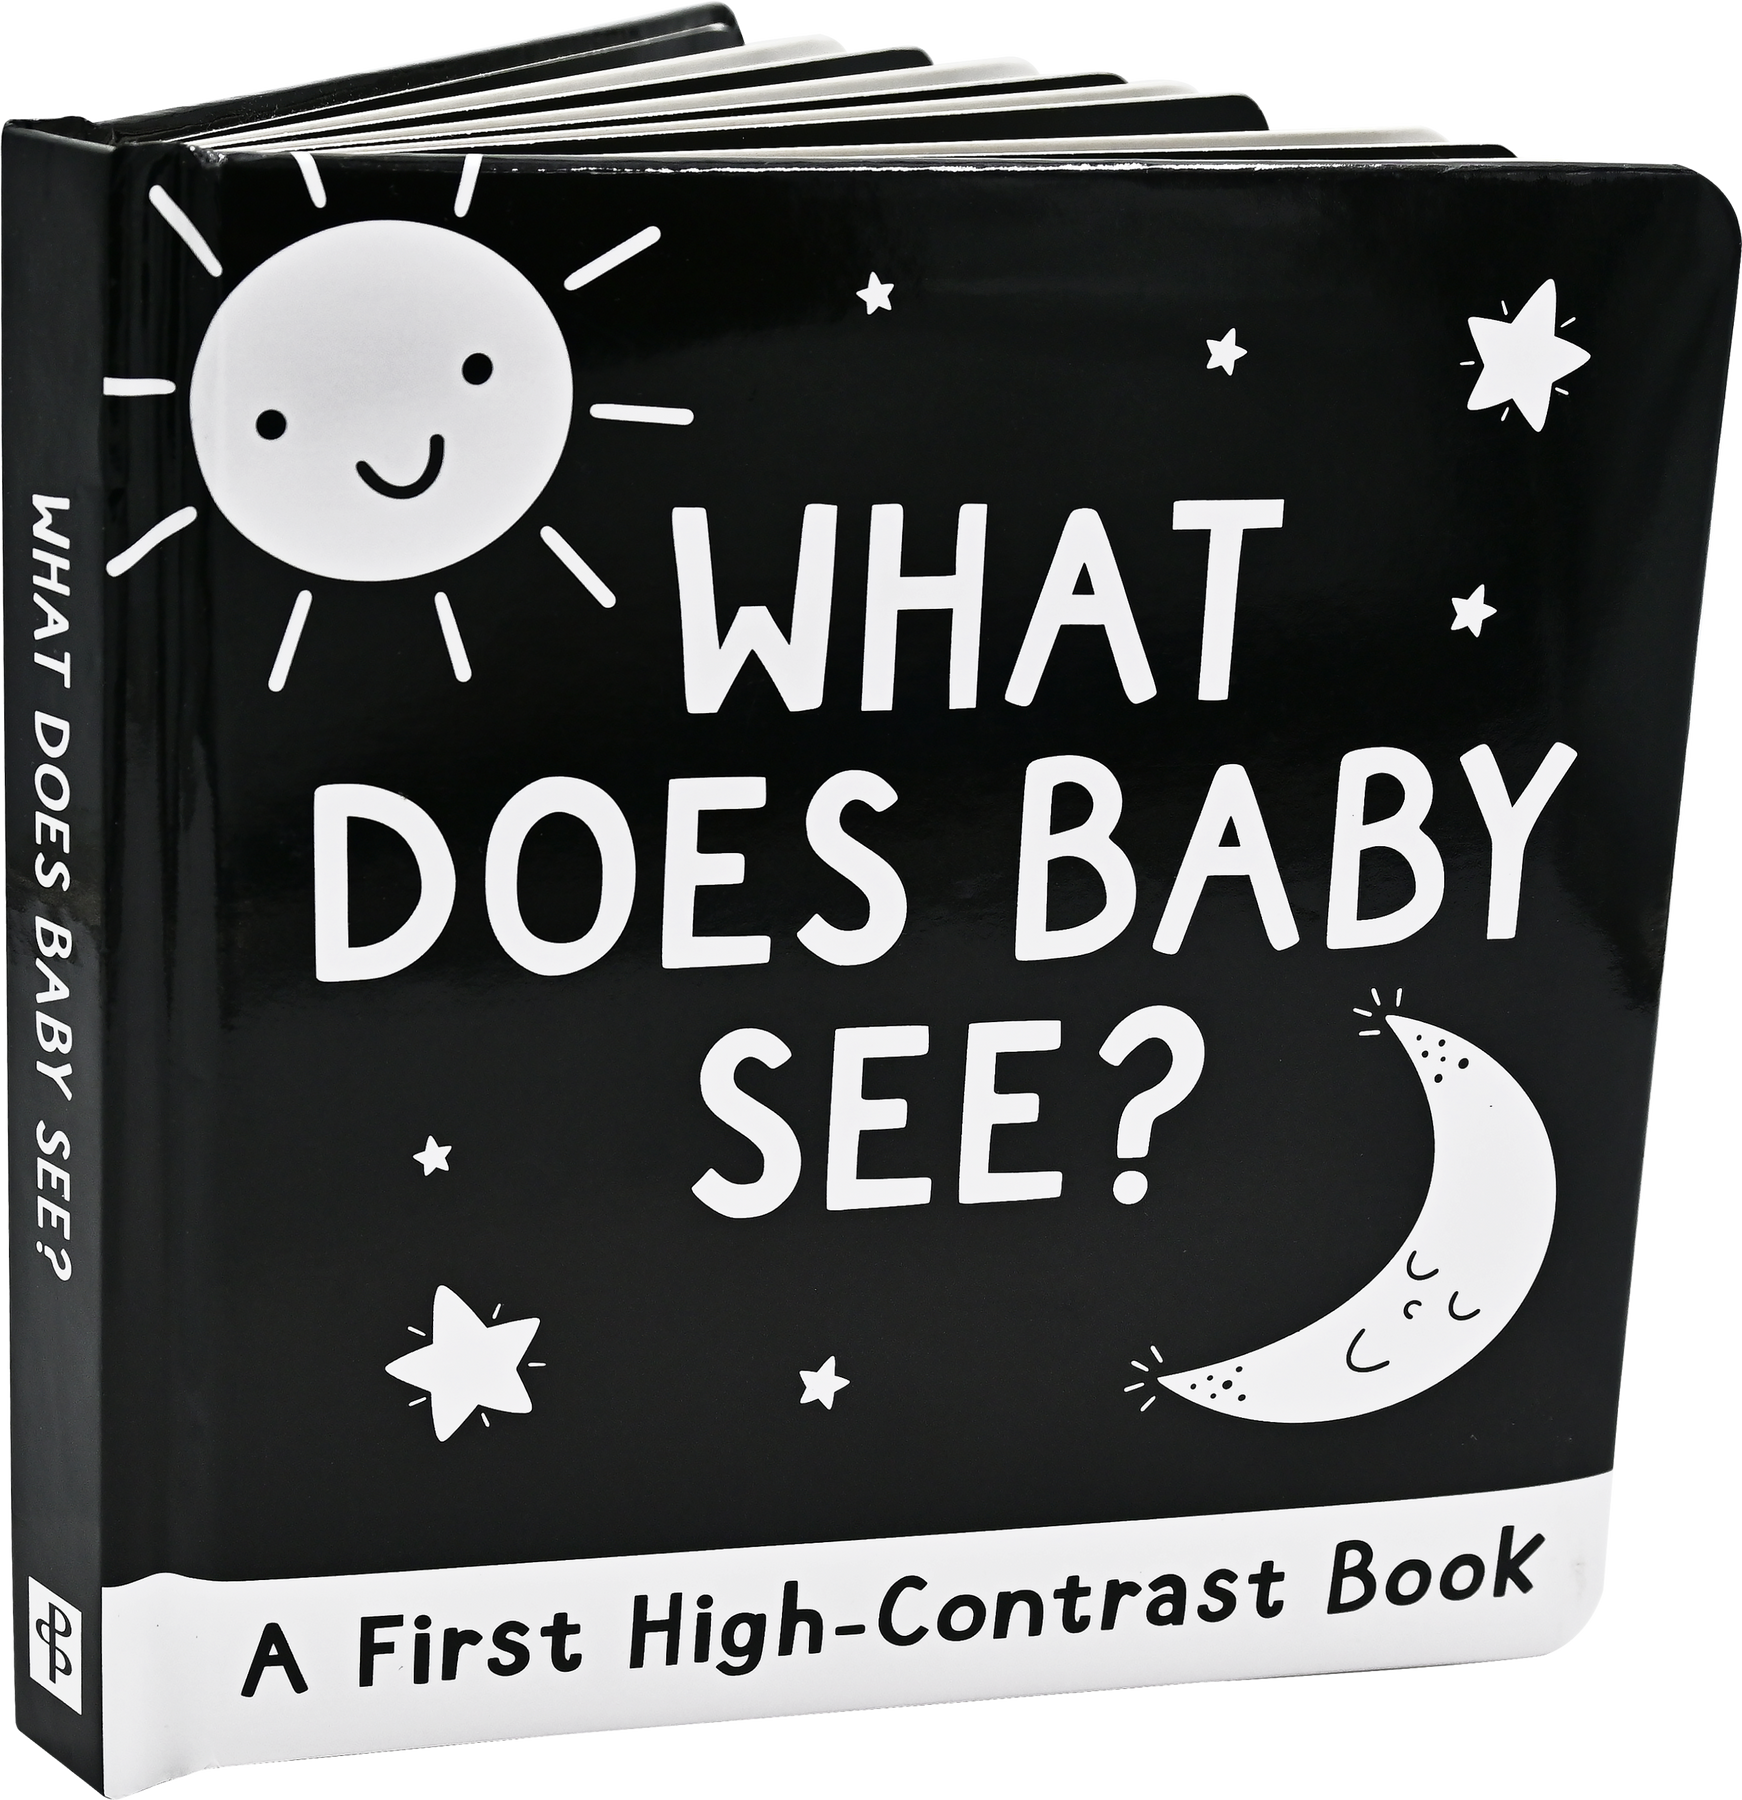 What Does Baby See? by Peter Pauper Press #340054